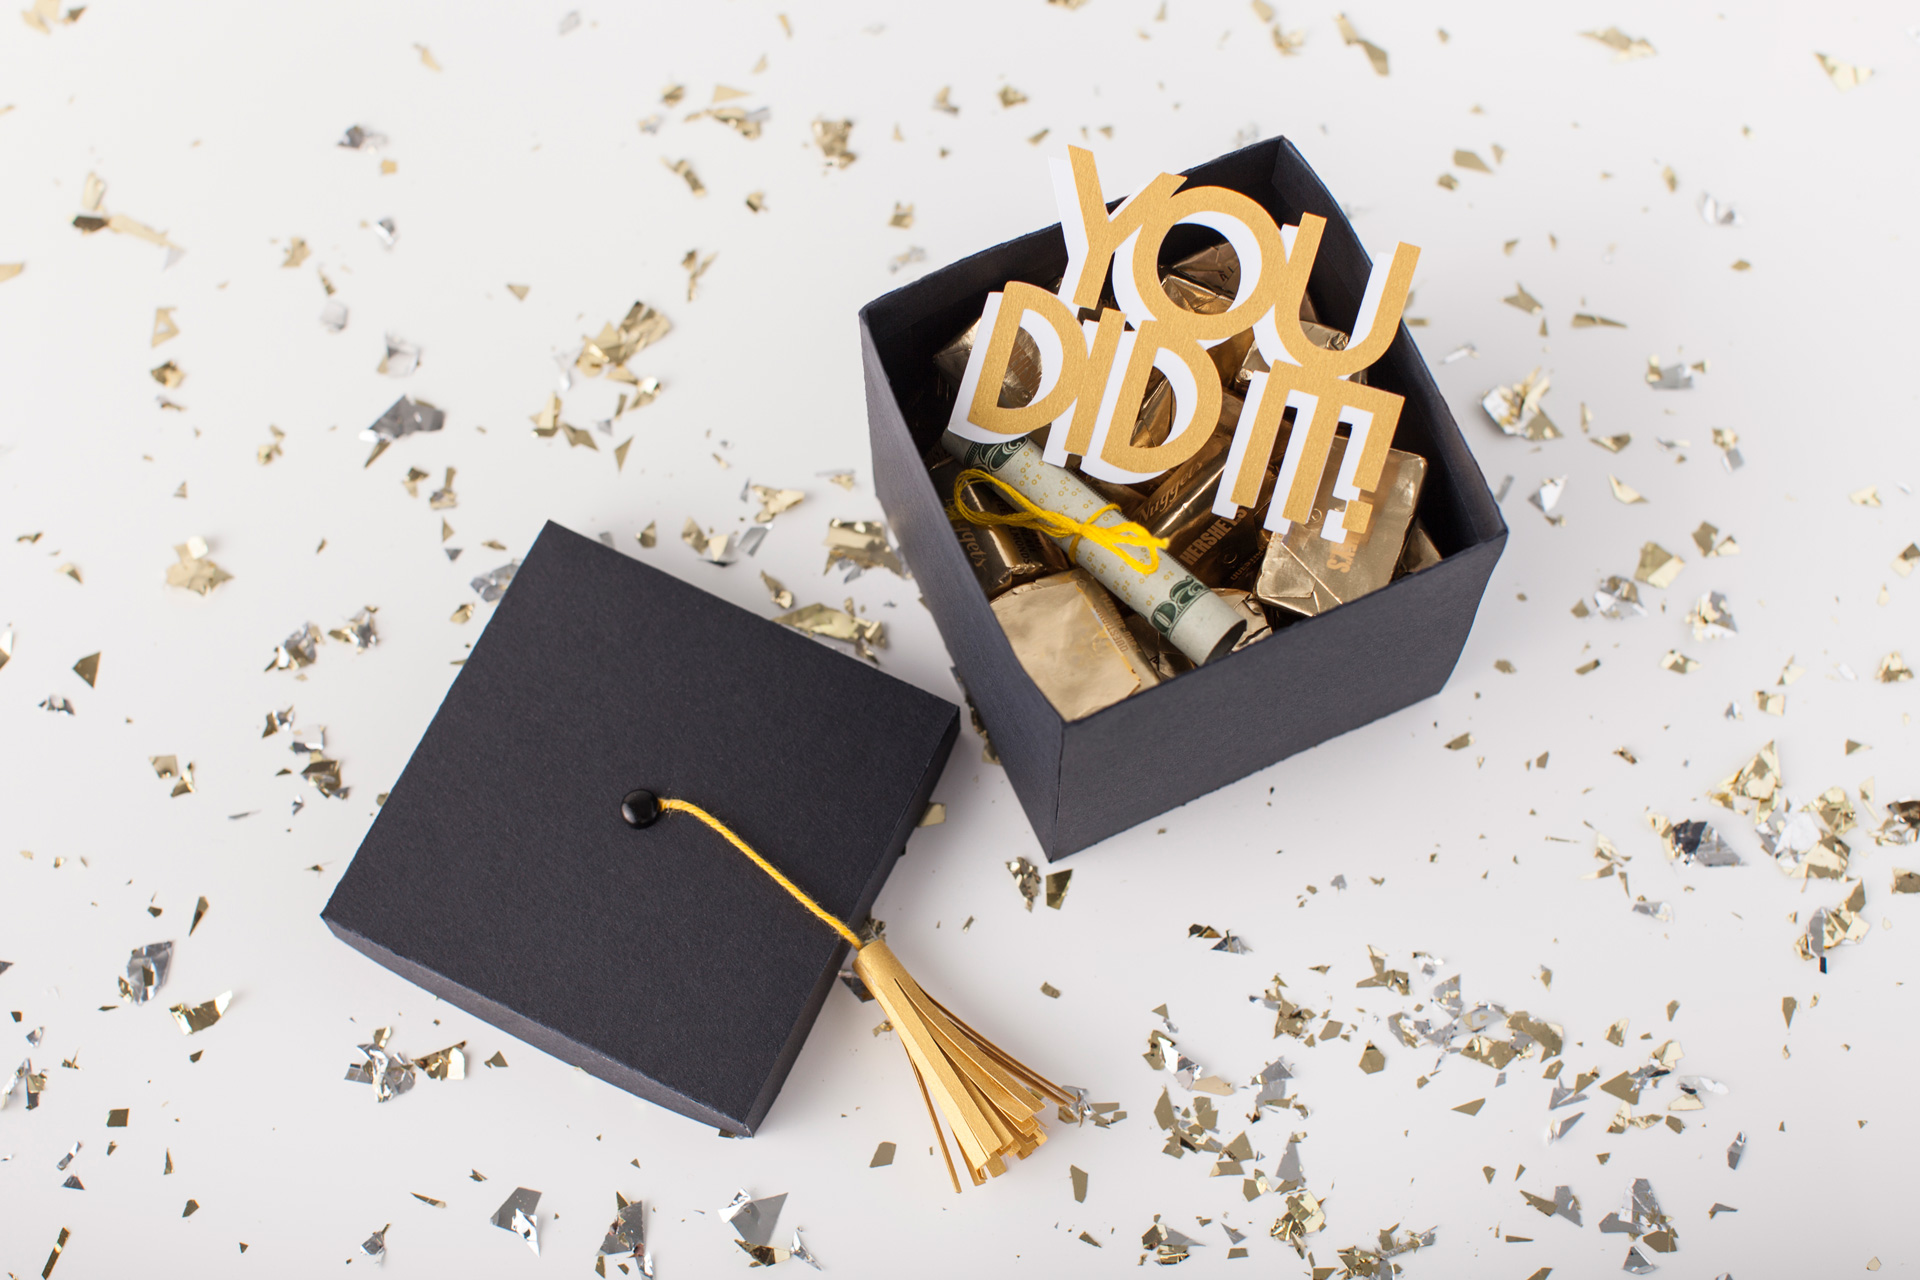 Black graduation cap-shaped gift box stuffed with chocolates and money and Cricut-cut sign that says "You Did It"